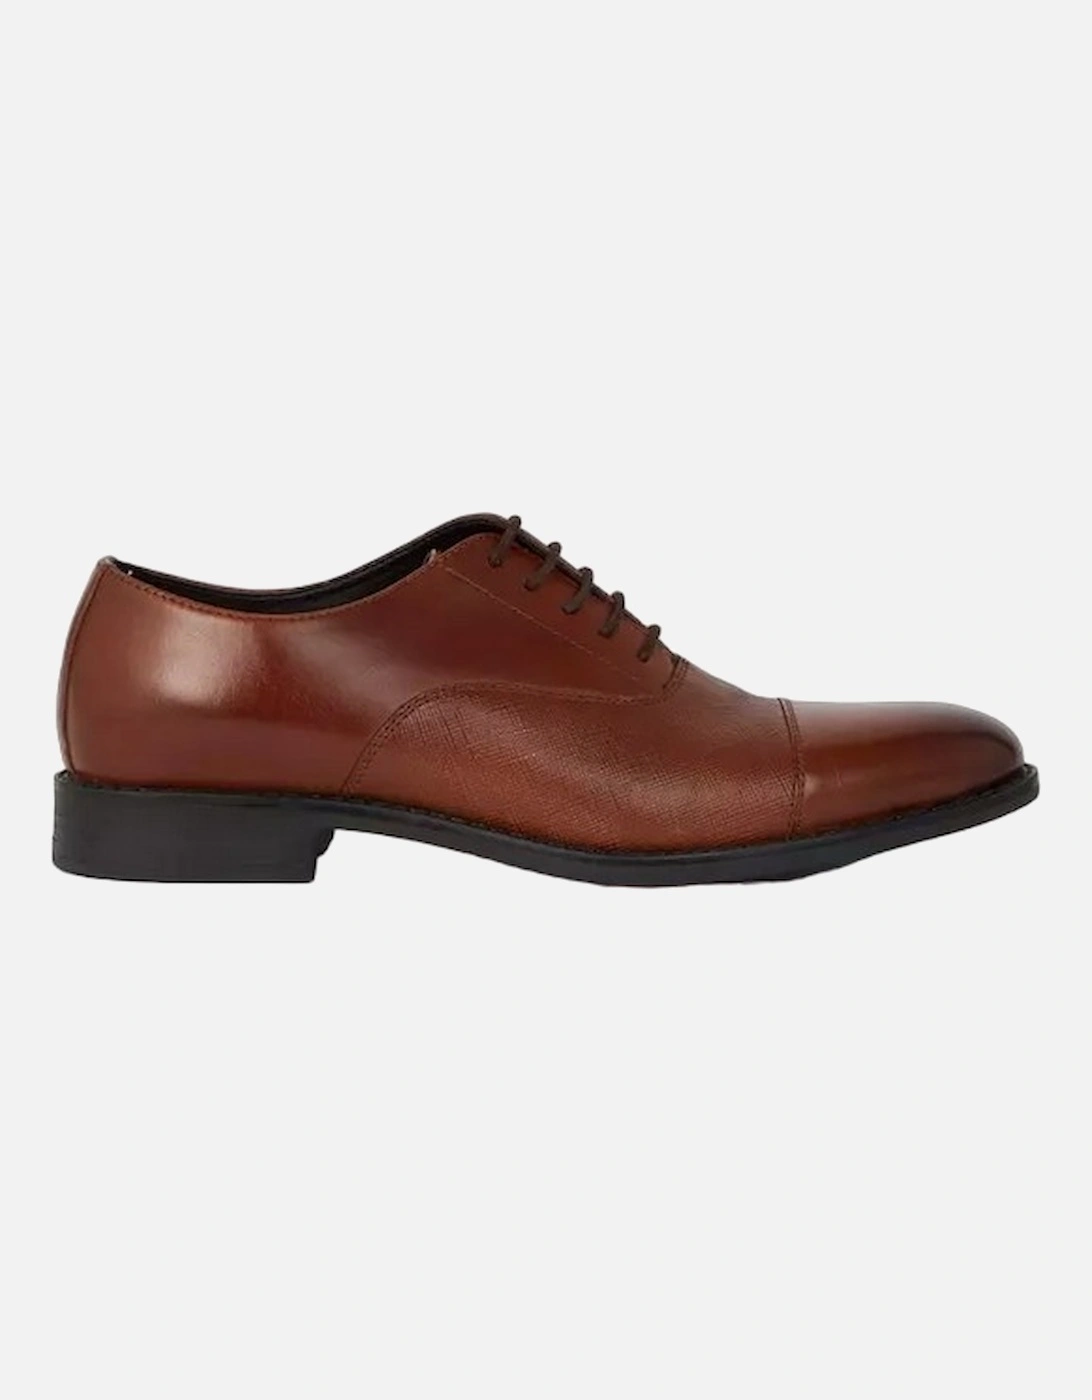 Mens Noble Leather Embossed Vamp Oxford Shoes